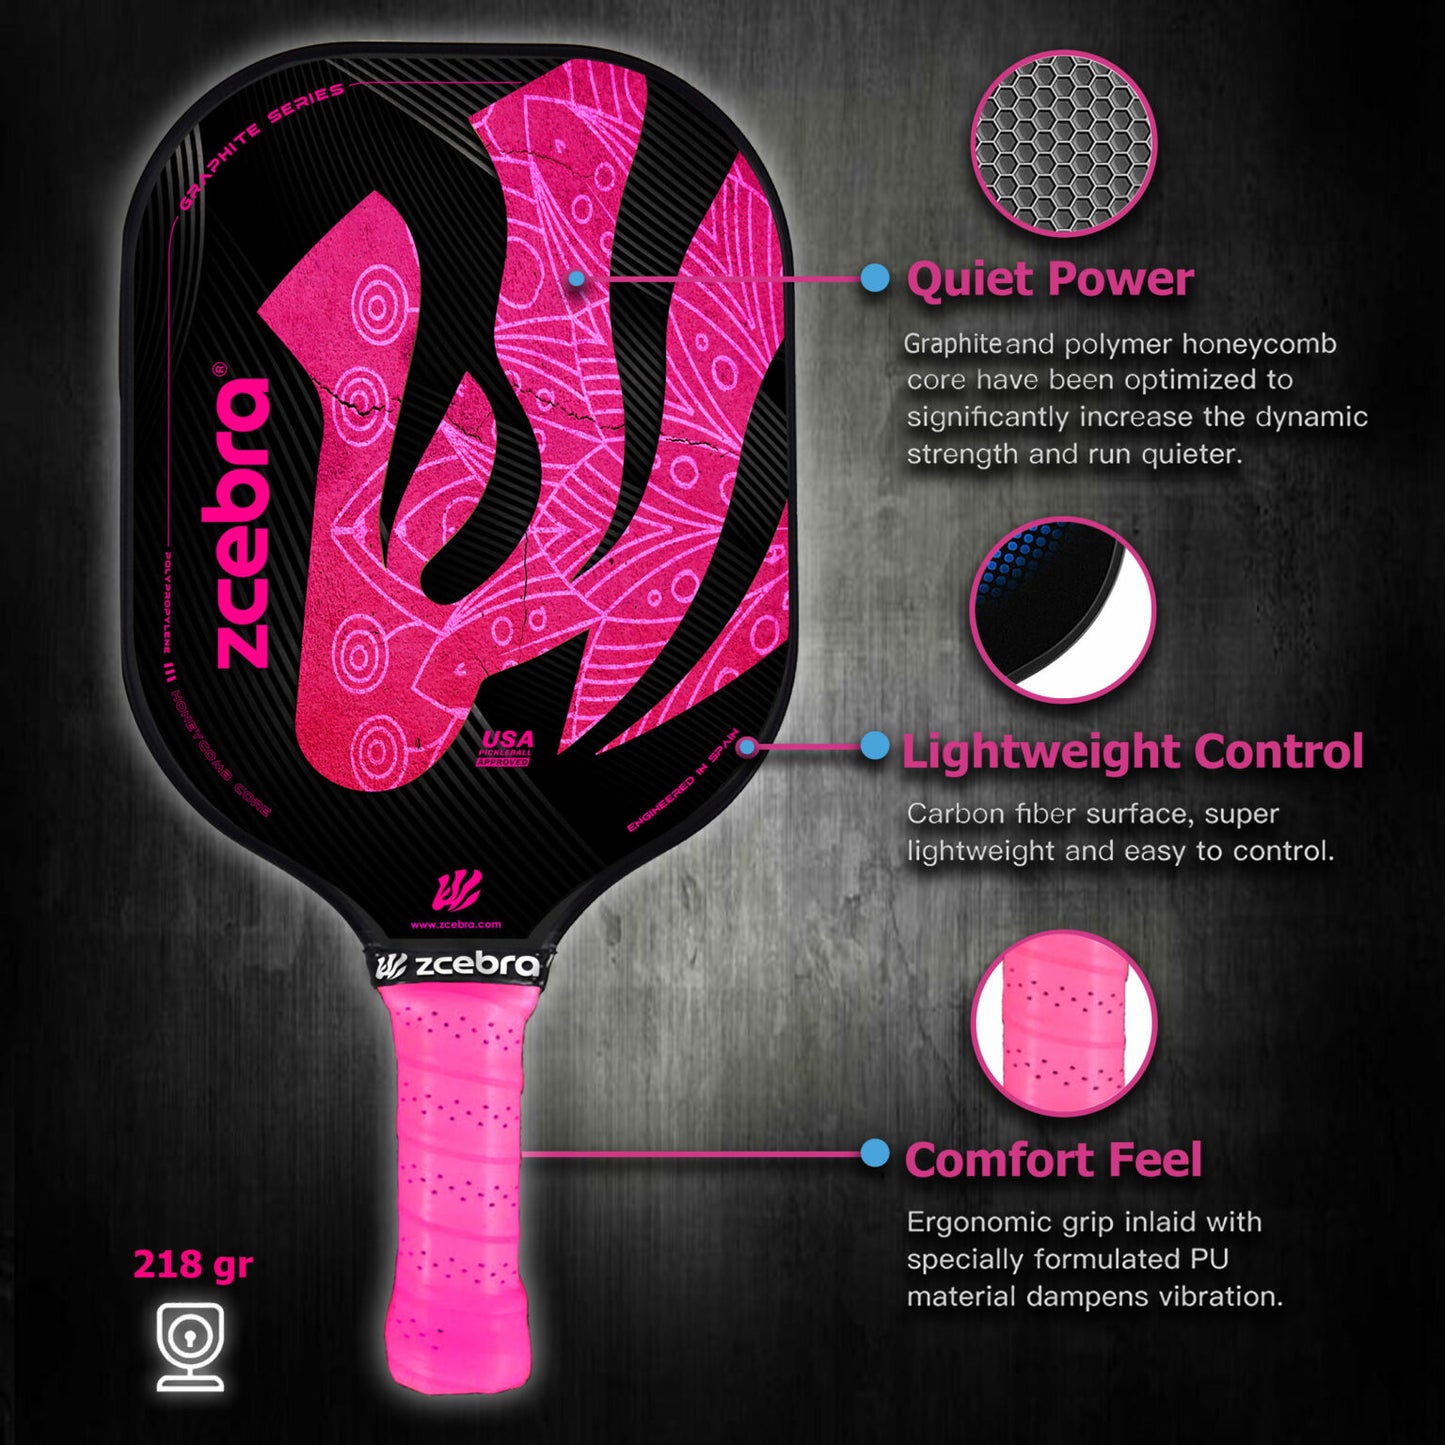 GRAPHITE SERIES Pickleball Paddle (pink edition)